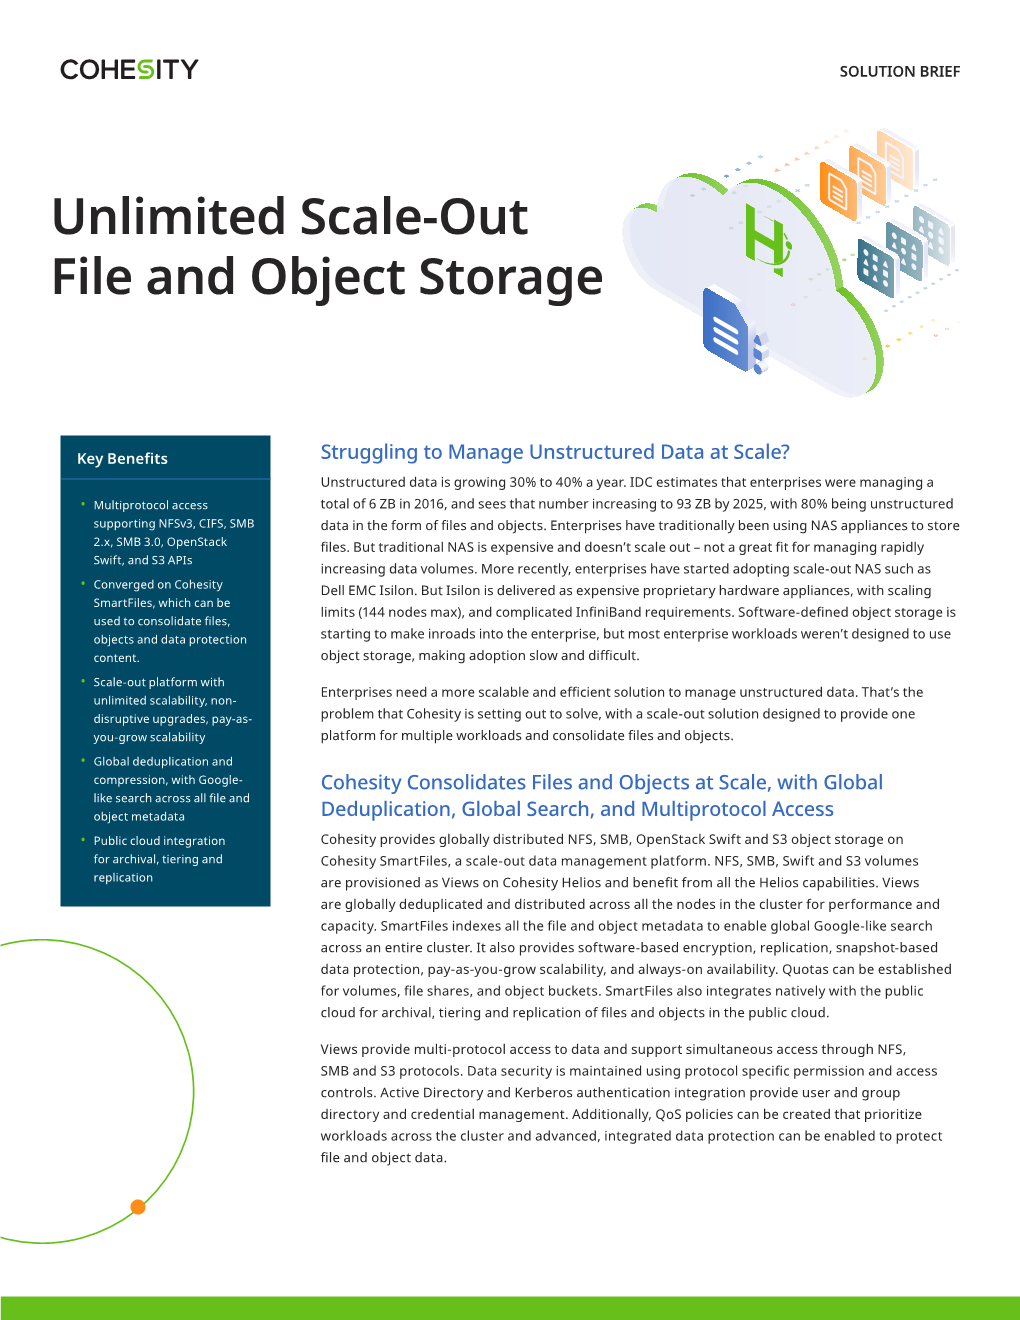 Unlimited Scale-Out File and Object Storage